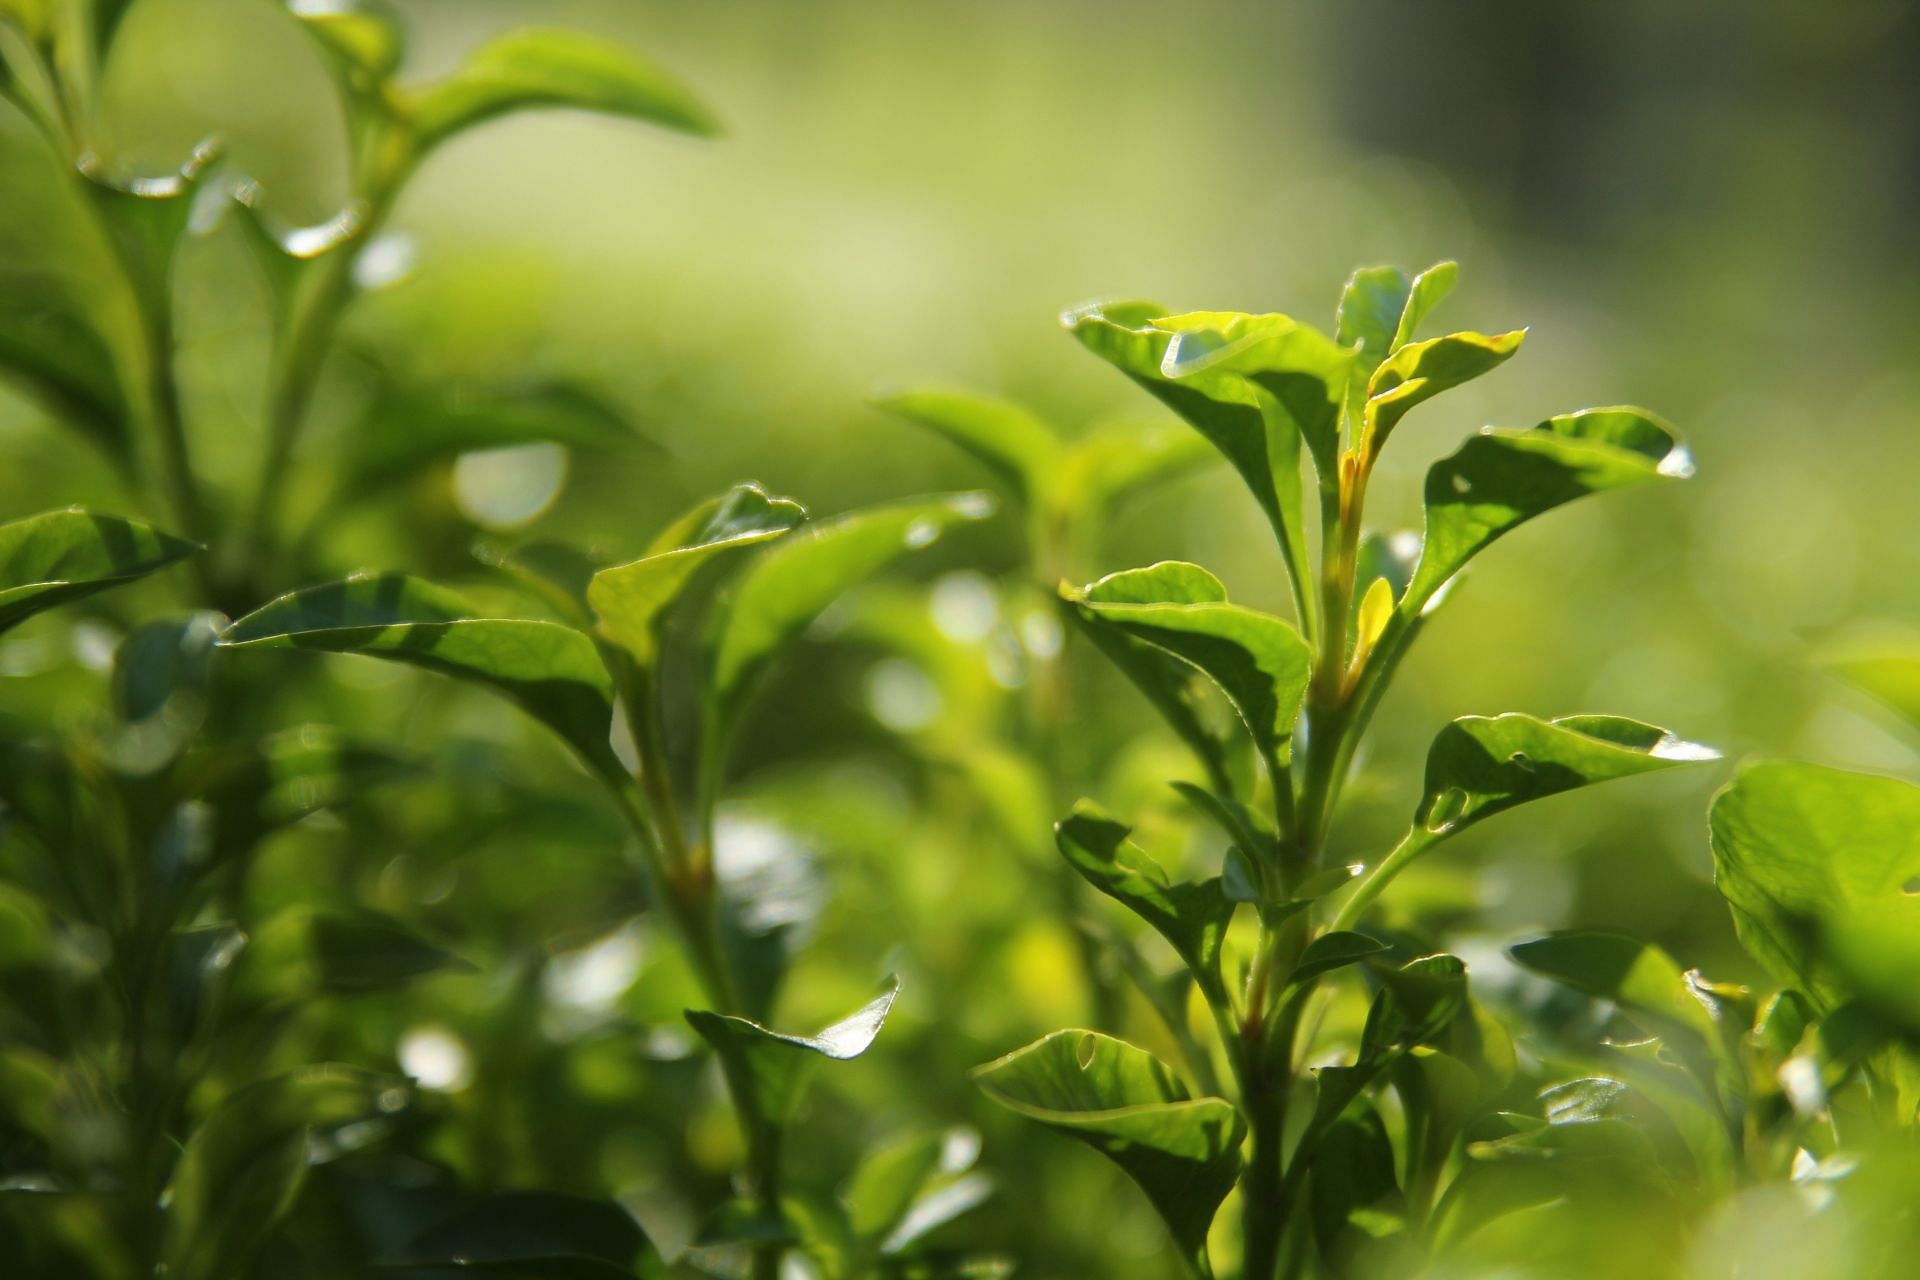 There are various ways to drink green tea. (Image via Unsplash/Timothy Newman)